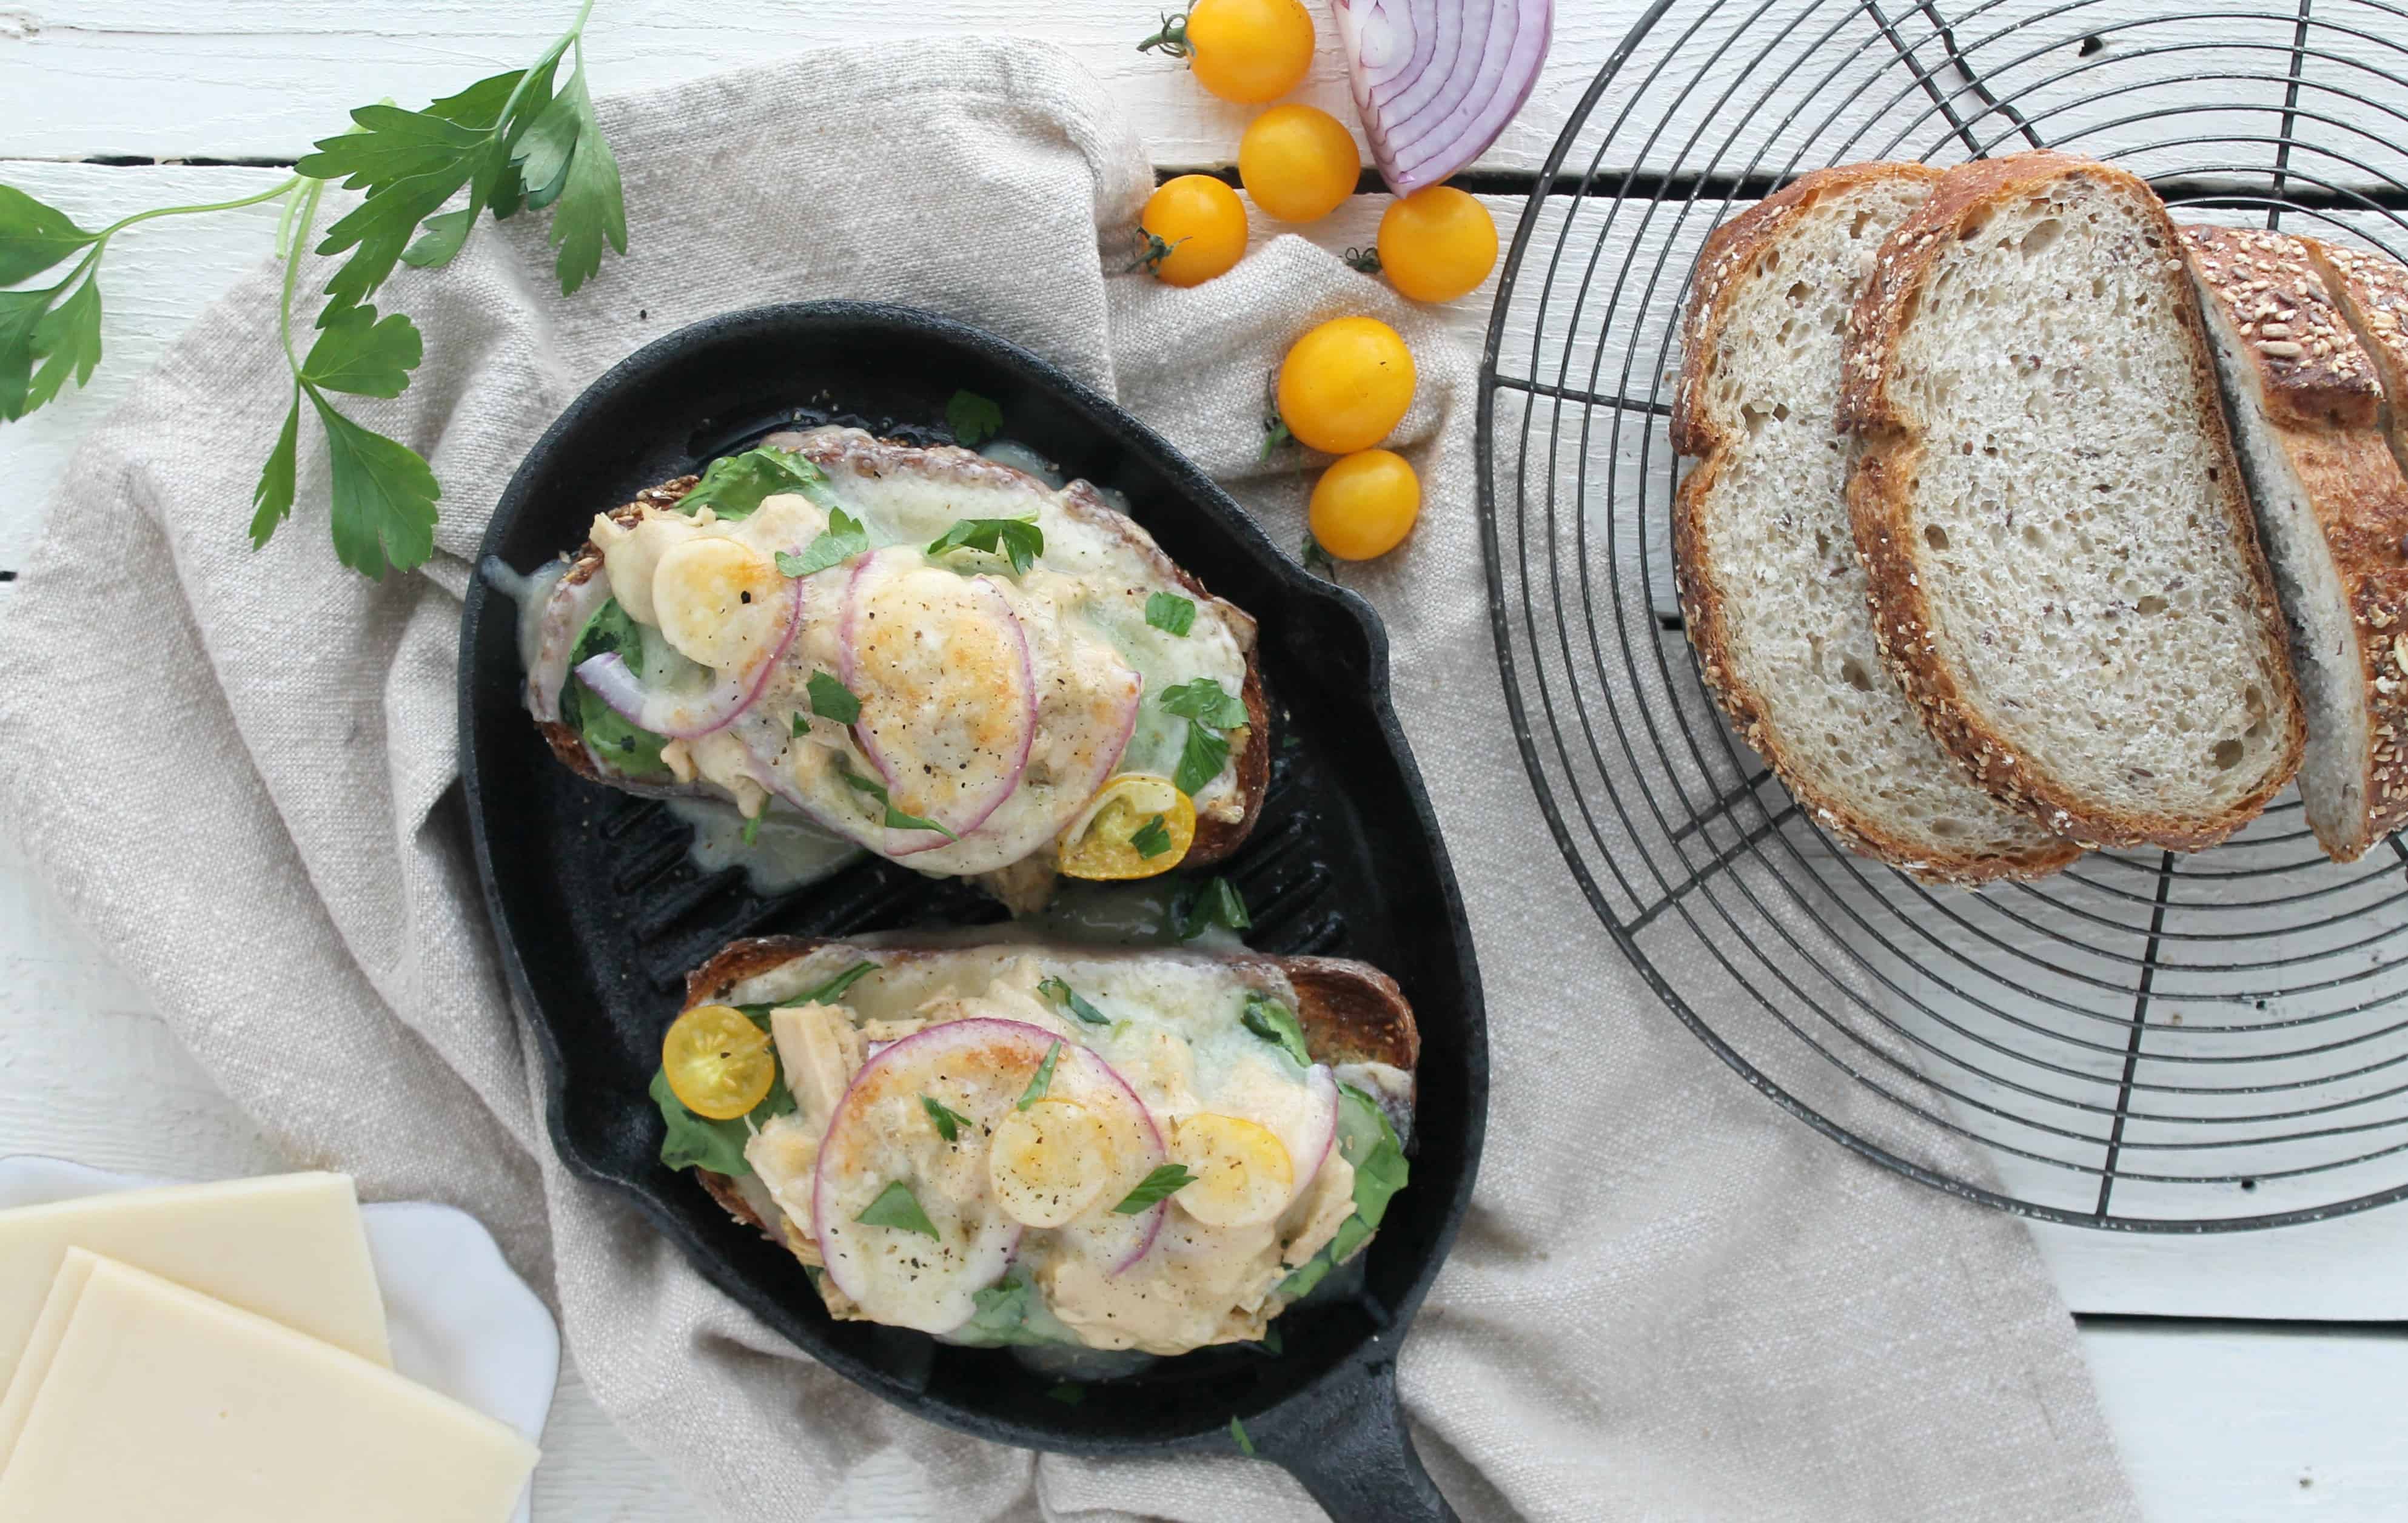 Find this Cheddar Pesto Tuna Melt and more in this recipe roundup for Seafood Nutrition Month on the Street Smart Nutrition Blog in partnership with Seafood Nutrition Partnership